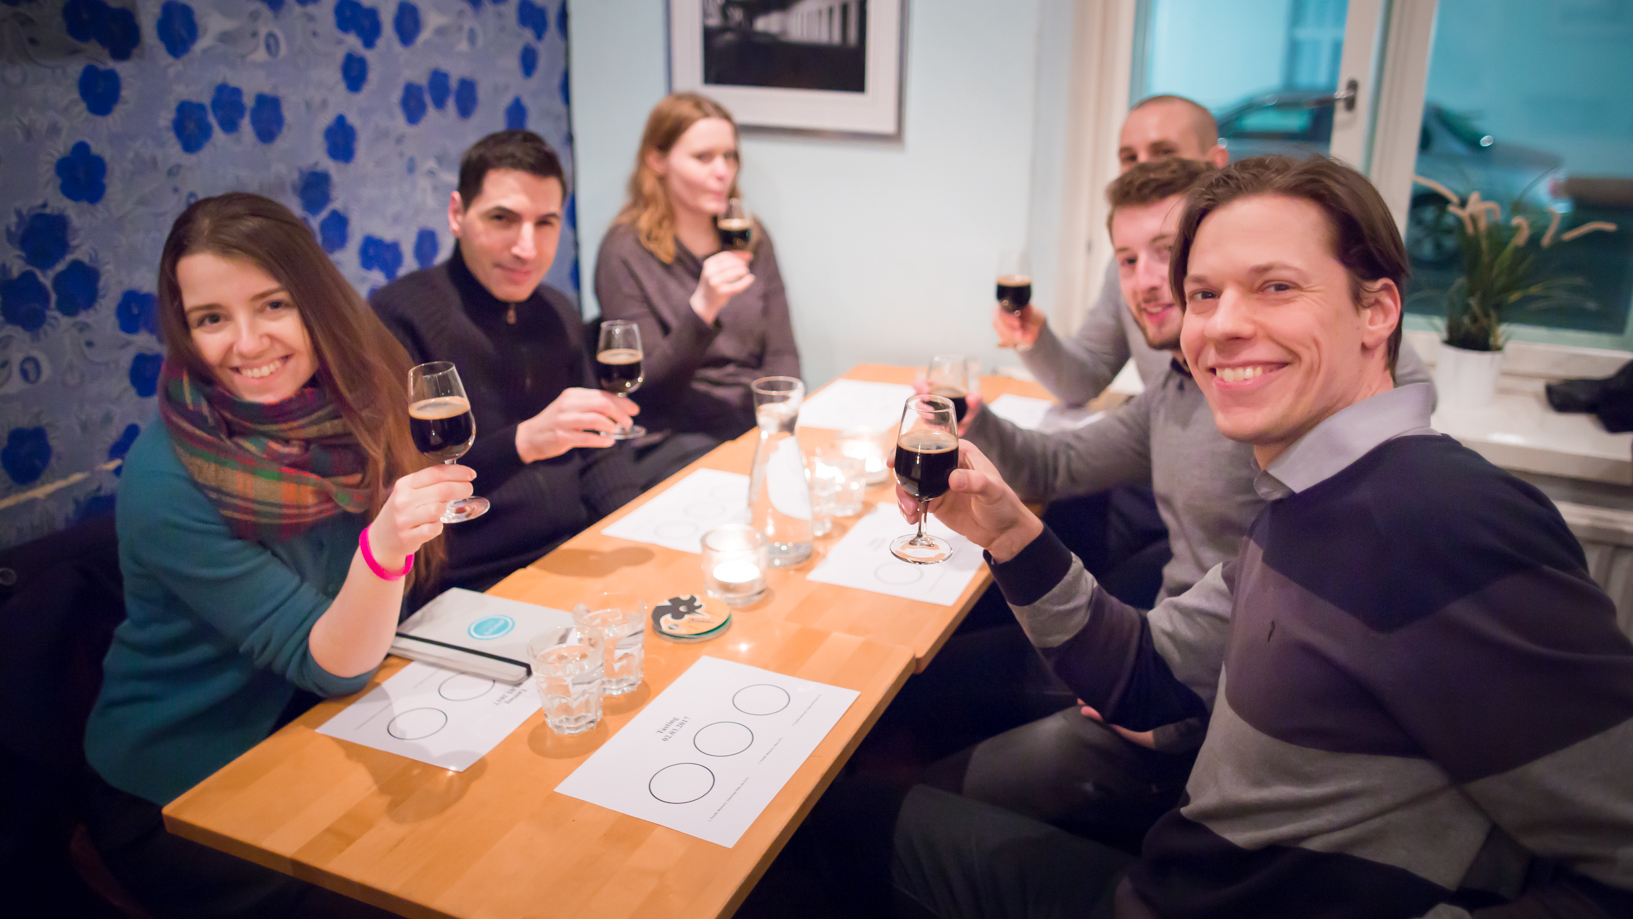 Six smiling people lift their glasses to share a toast inside a Finnish brewery.